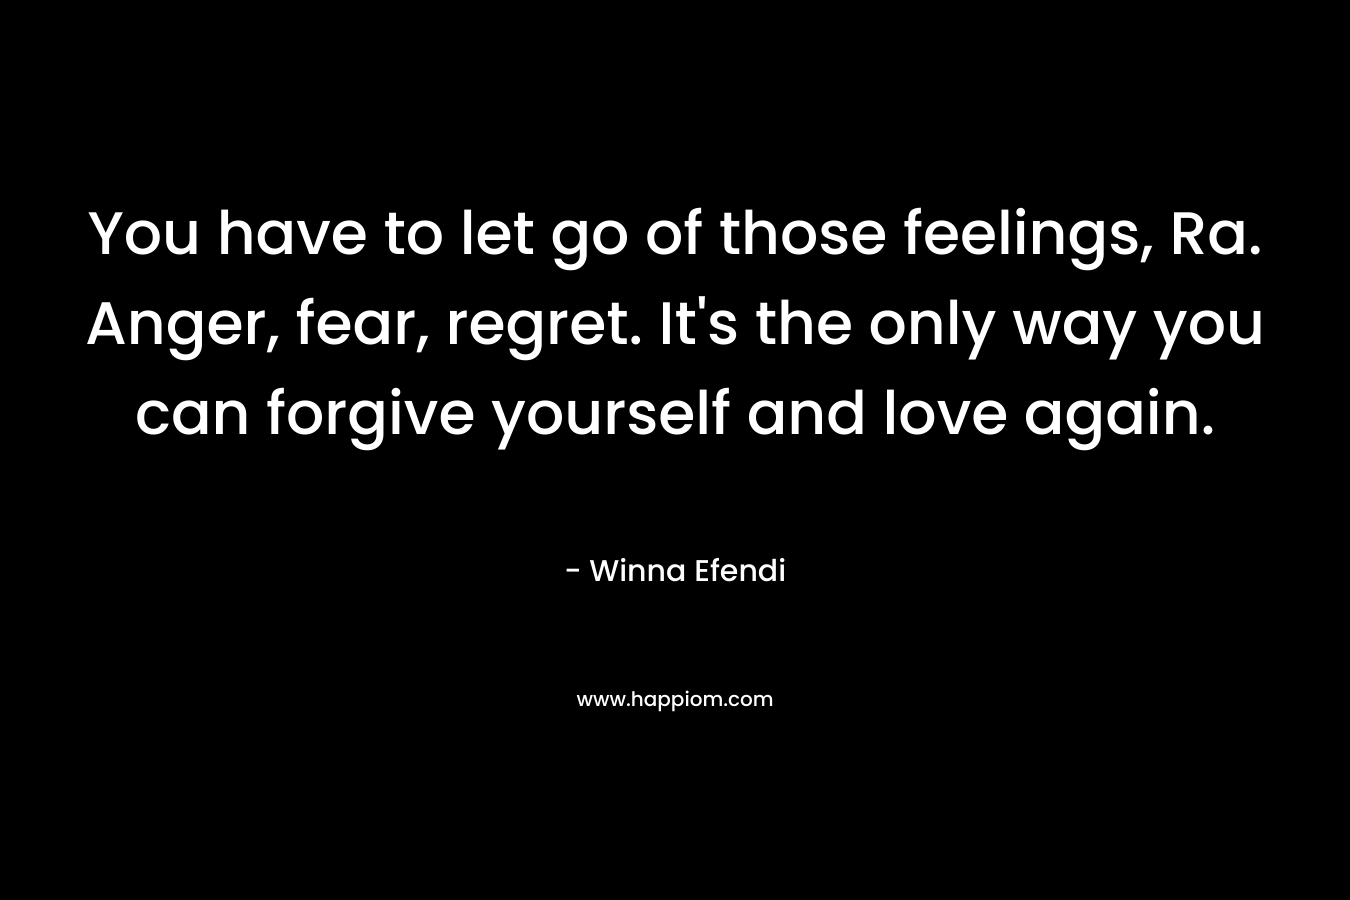 You have to let go of those feelings, Ra. Anger, fear, regret. It’s the only way you can forgive yourself and love again. – Winna Efendi